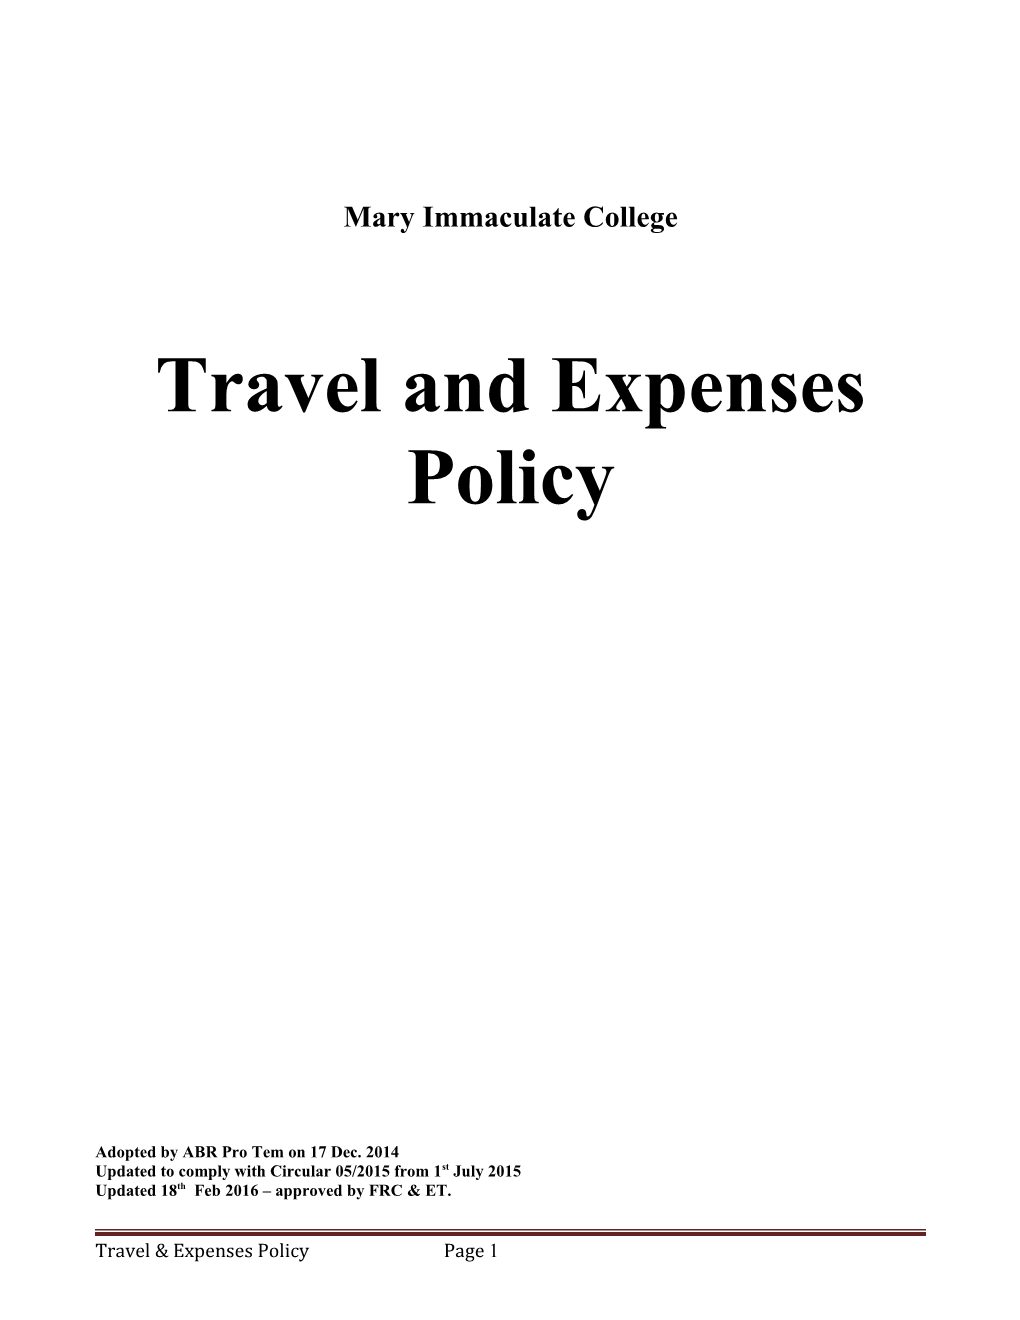 Travel and Expenses Policy